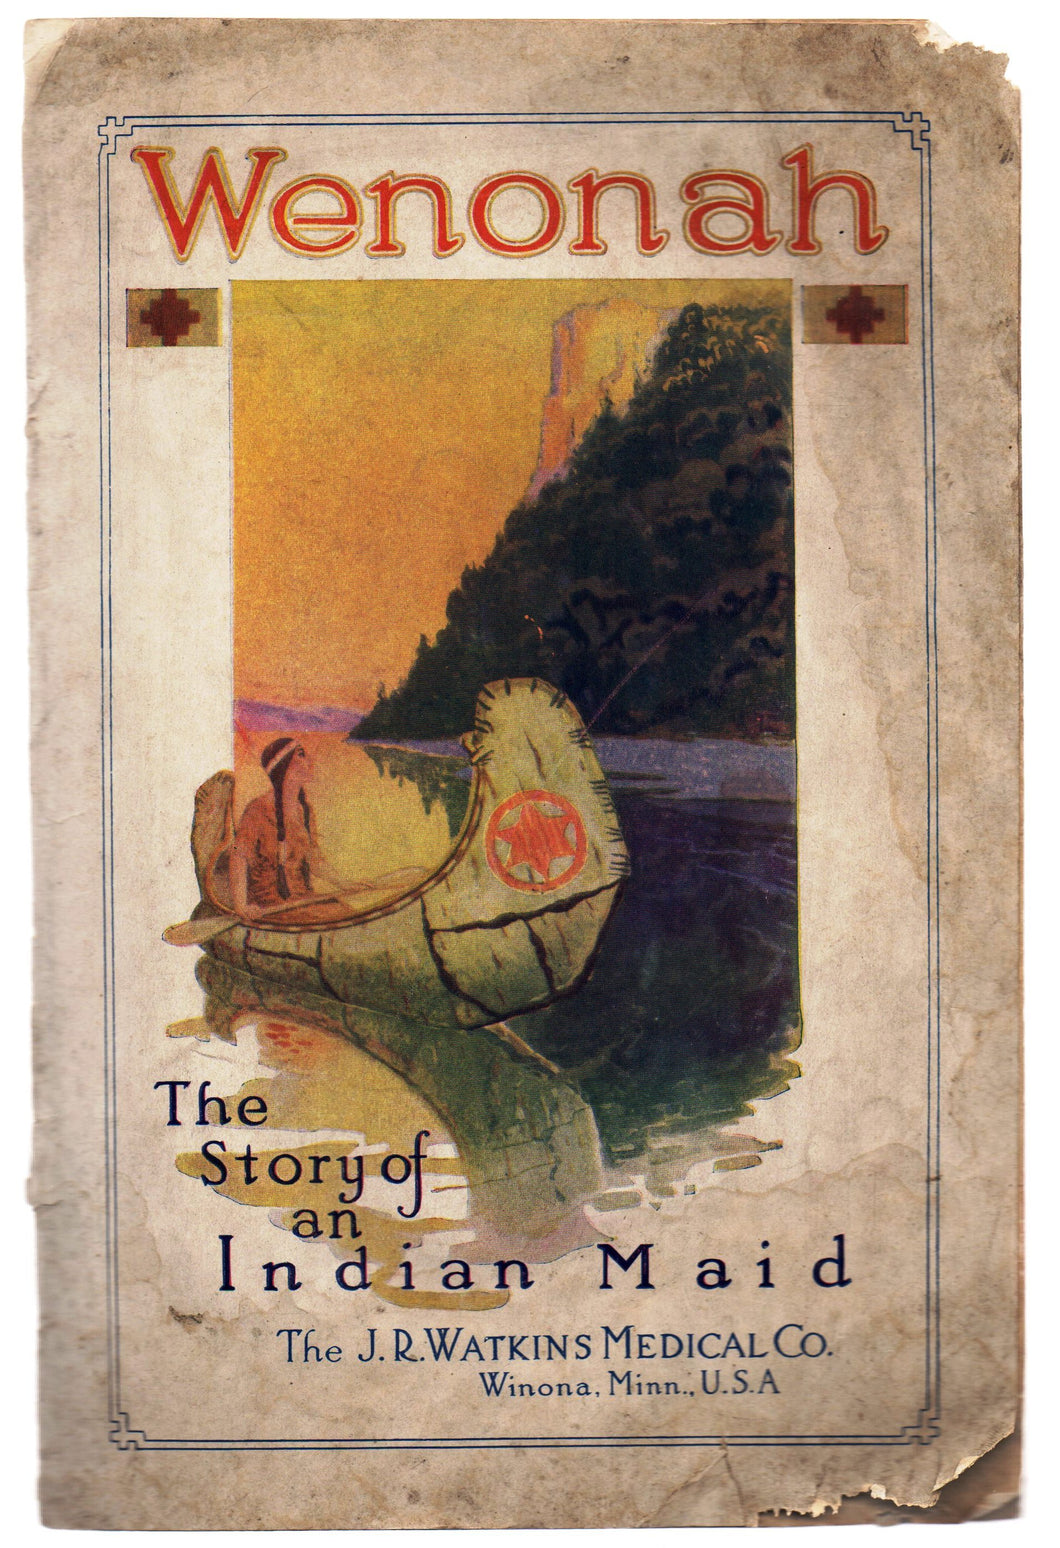 Wenonah: The Story of an Indian Maid